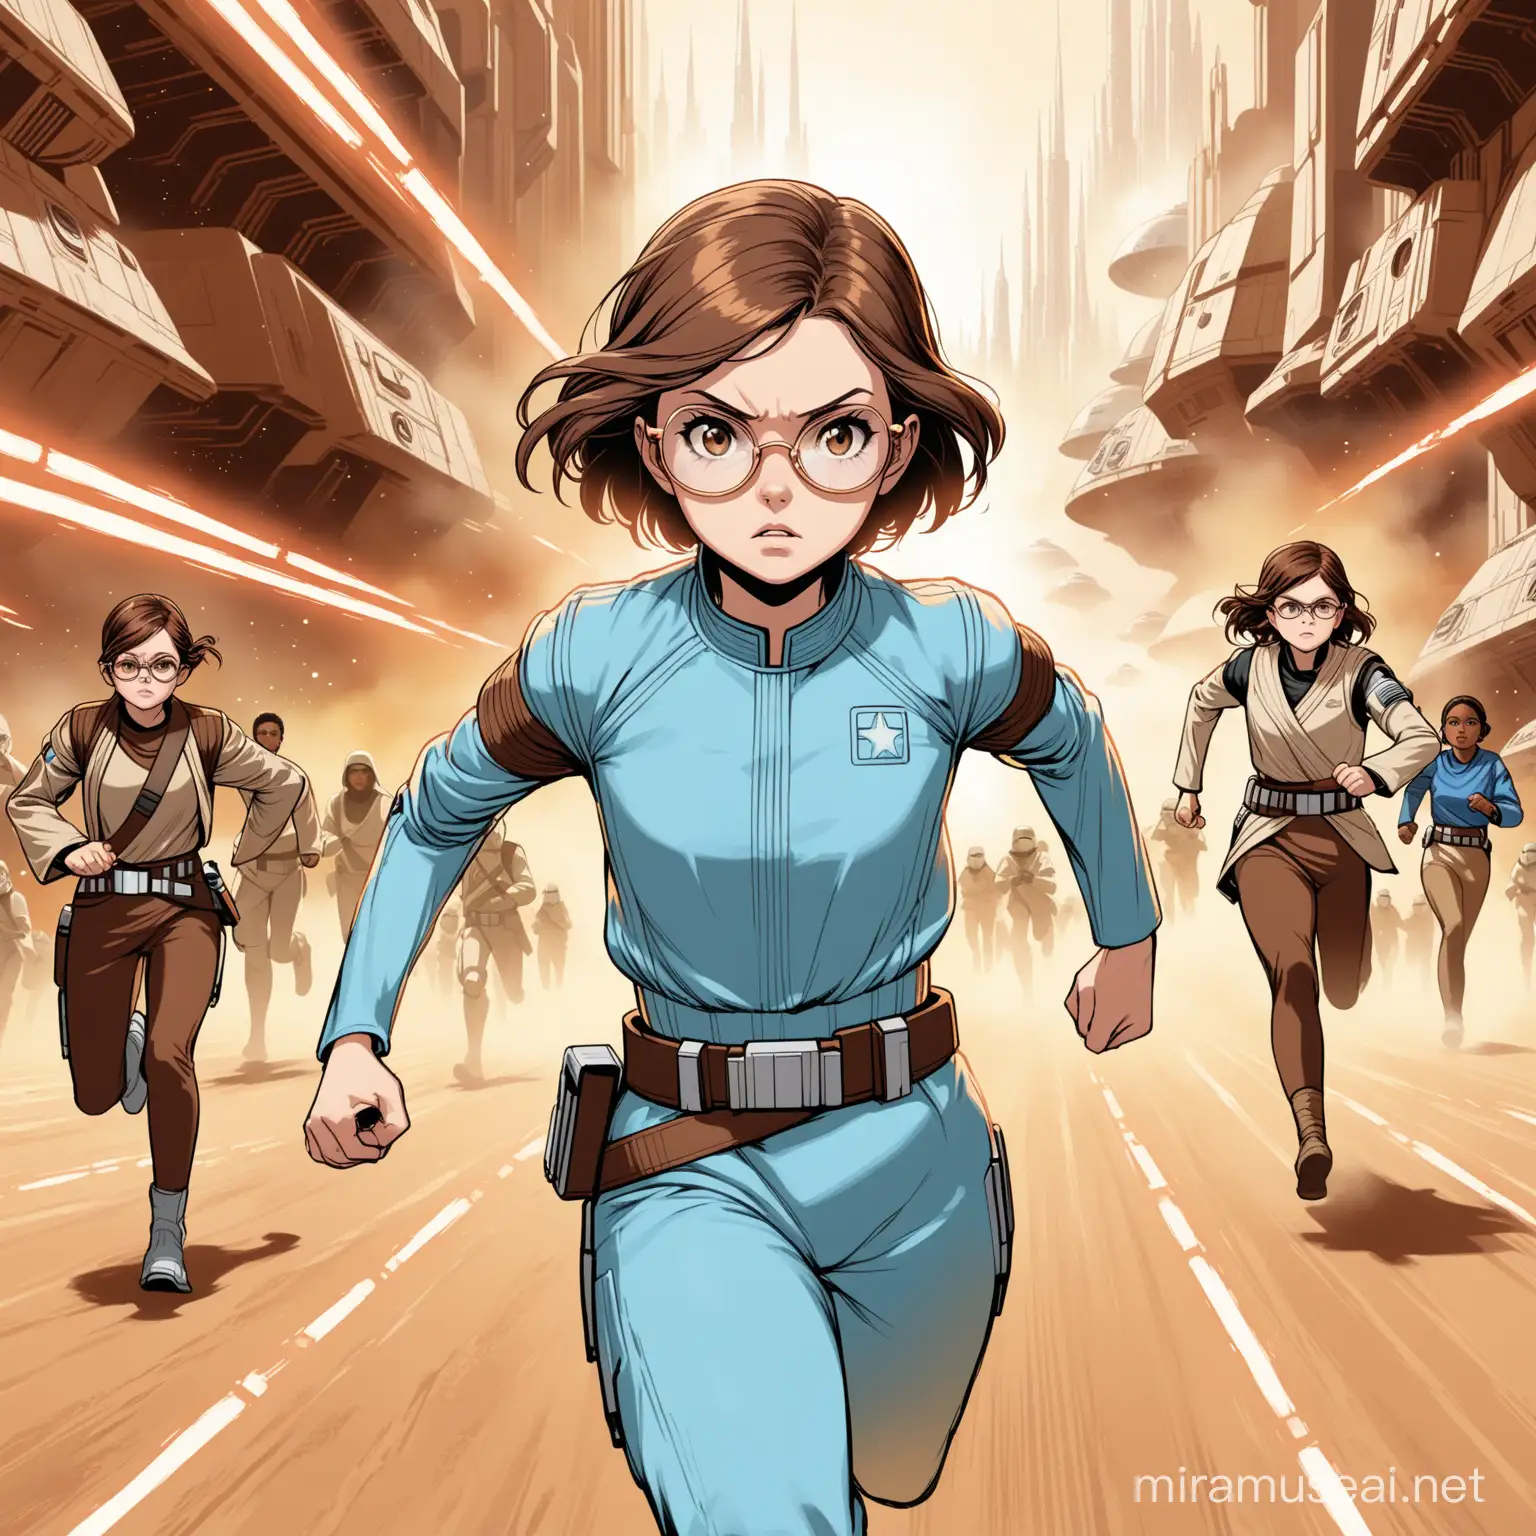 Determined 12YearOld Girl in Rose Gold Glasses Running Through Coruscant